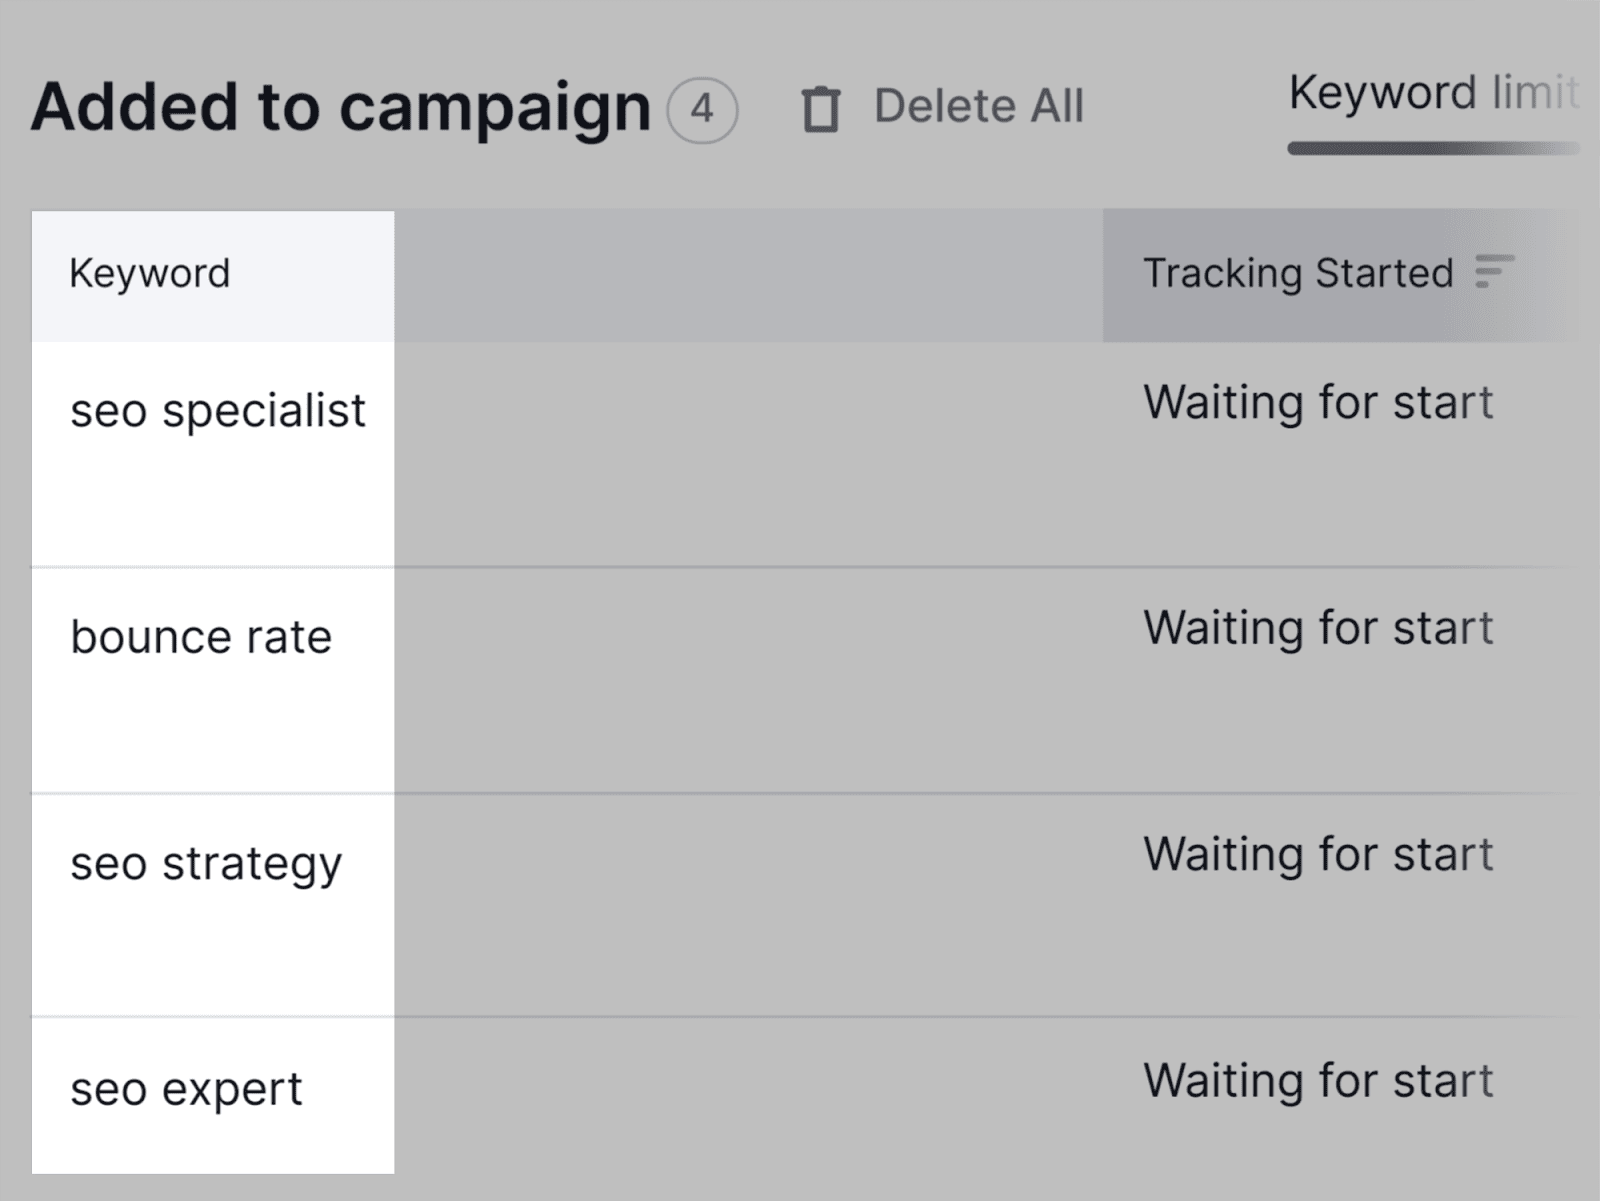 Keywords added to the campaign